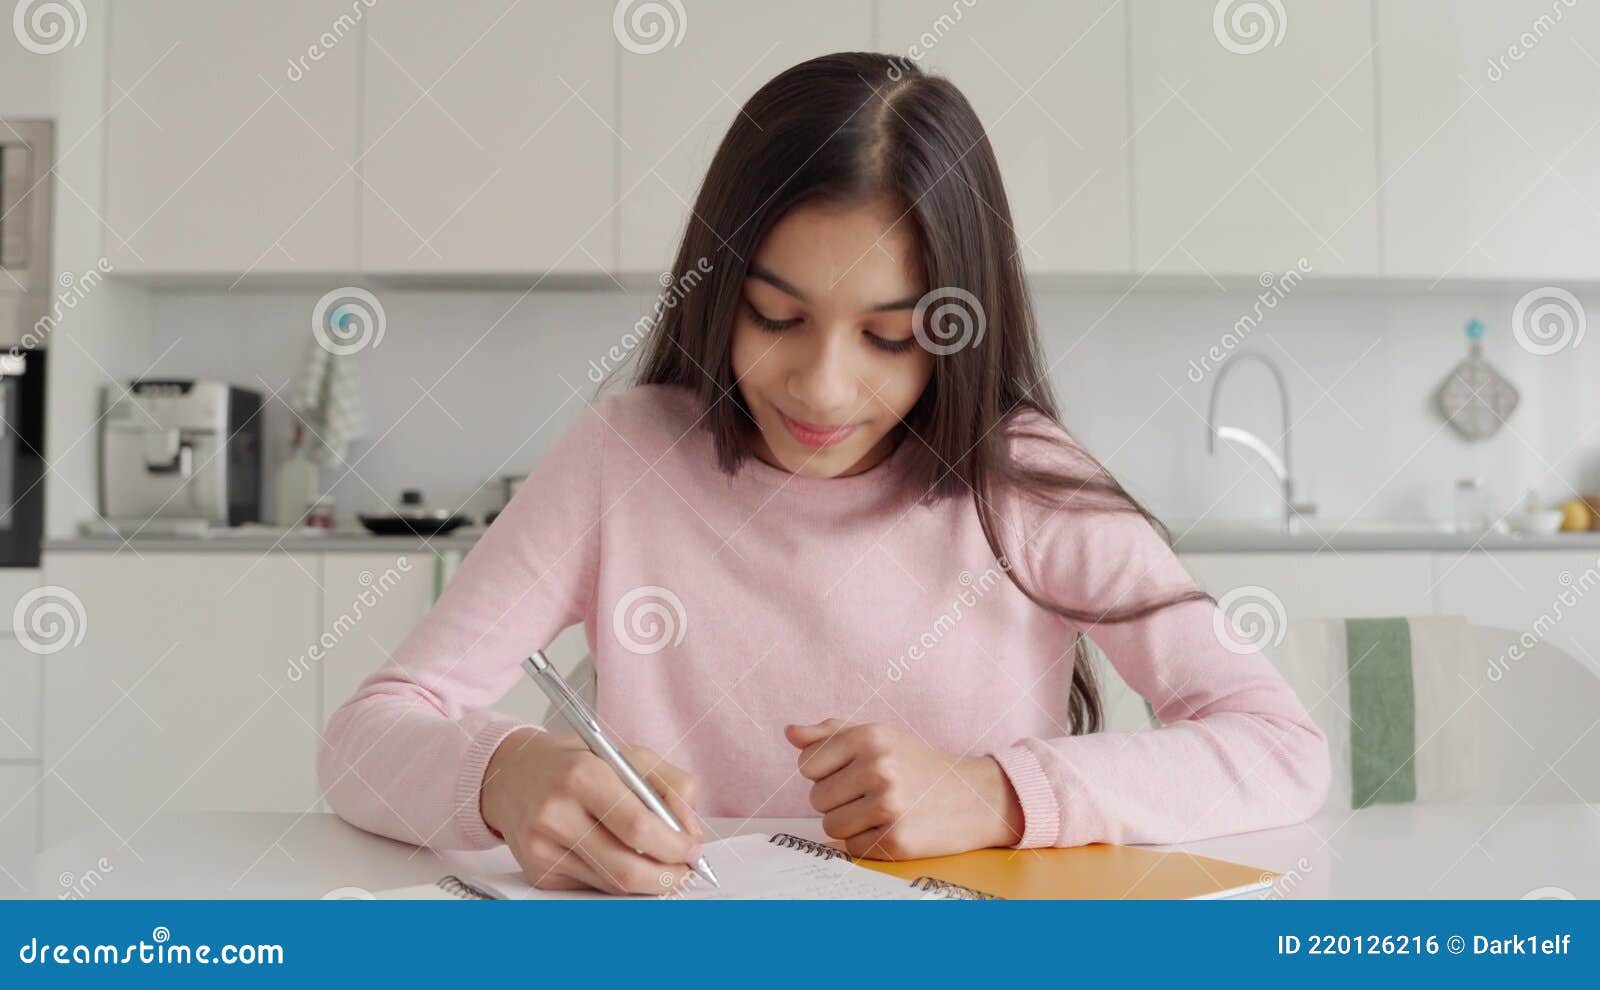 1600px x 990px - Webcam View of Indian Schoolgirl on Online Lesson Using Pc Laptop Computer.  Stock Footage - Video of talk, female: 220126216